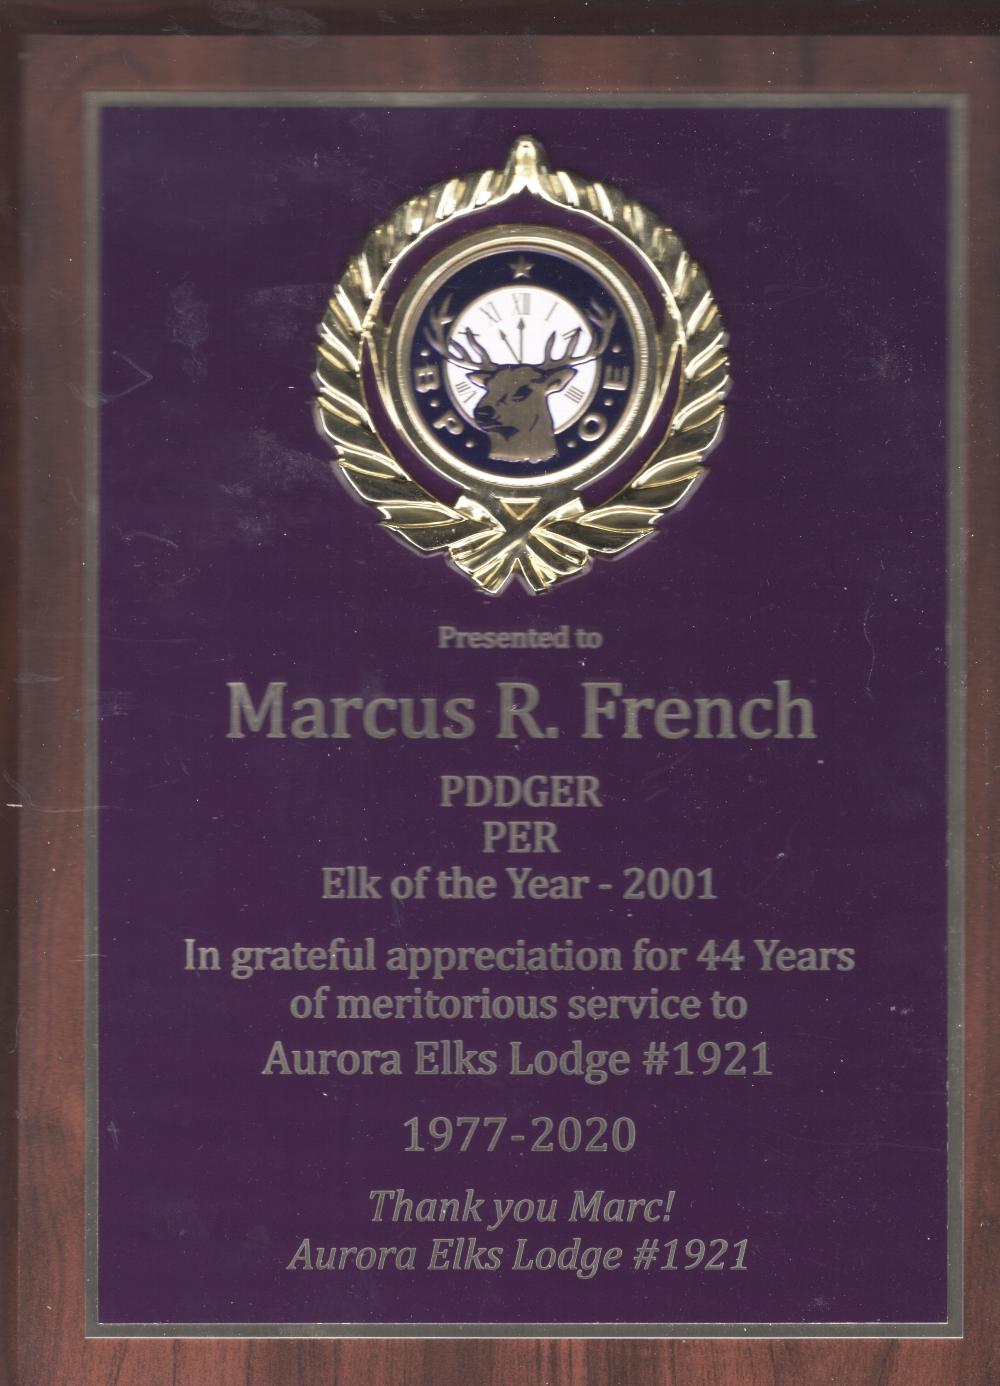 In memory of Marcus R. French